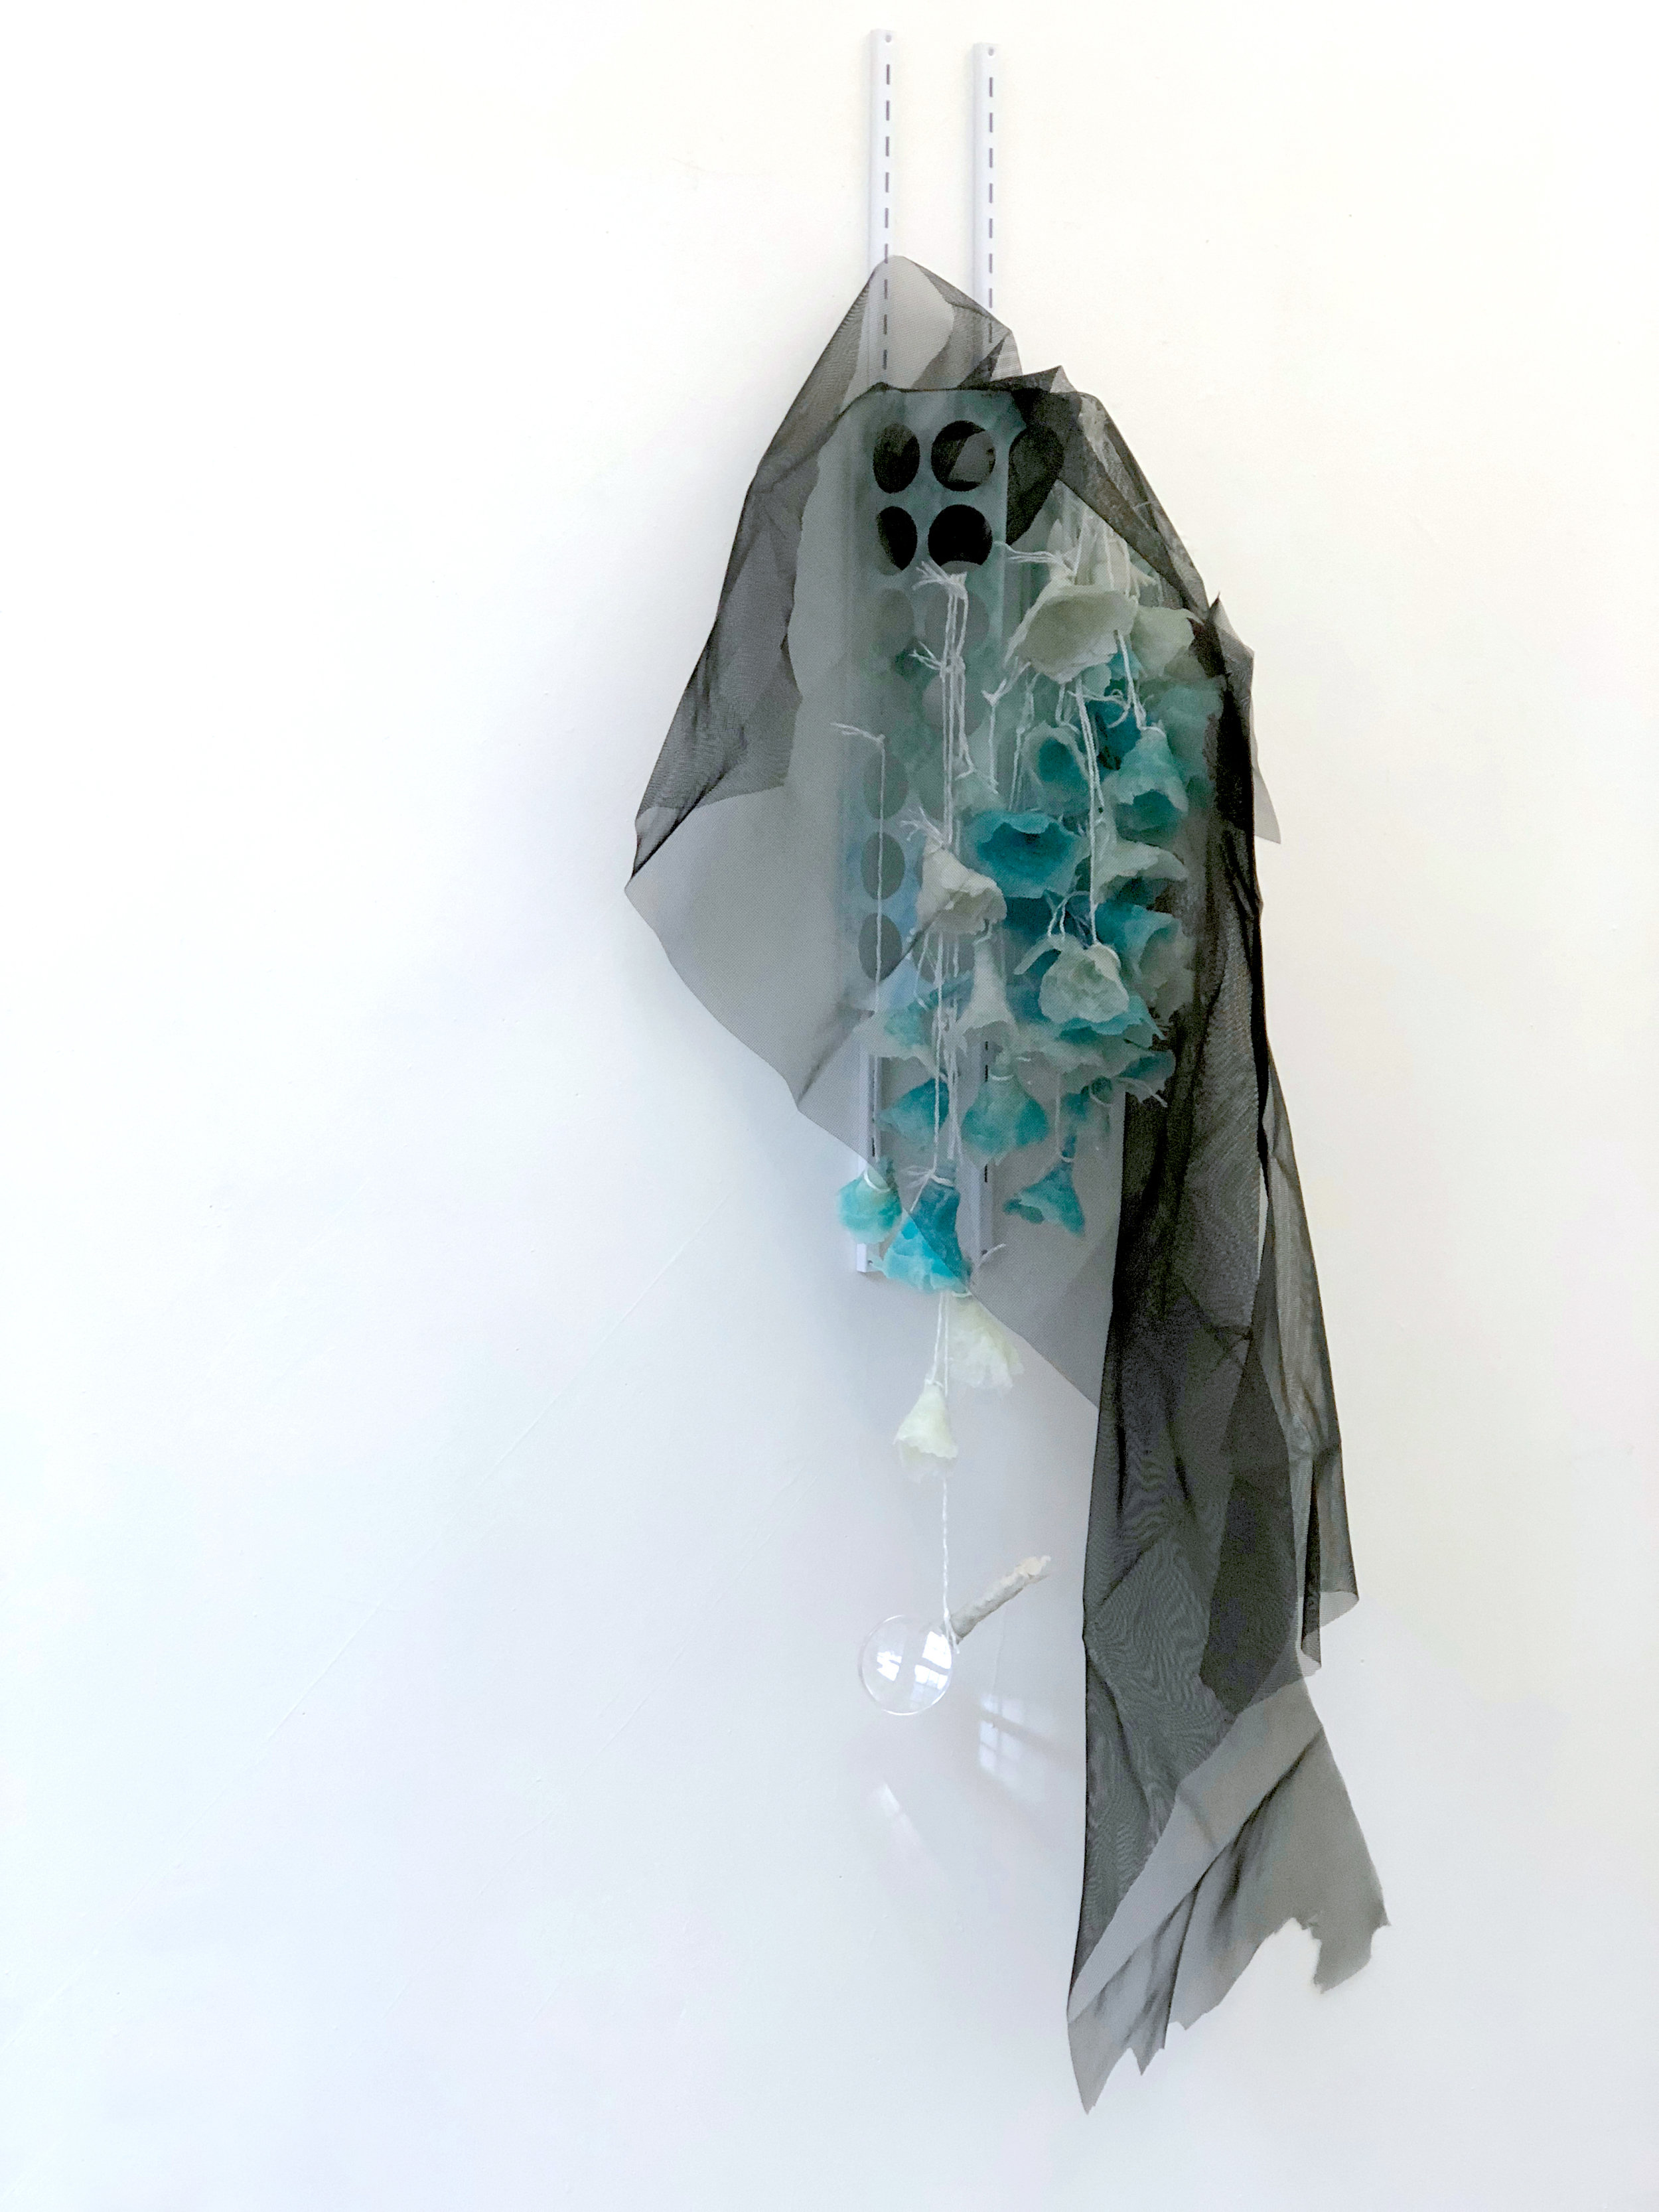    Shy Ghost  , 2018 Sheetrock joint compound gel, plastic bag dispense, wall bracket, polyester string, magnifying glass, charcoal fiberglass screen, lace, epoxy clay, acrylic and spray paint 67x30x17 inches    &nbsp;   